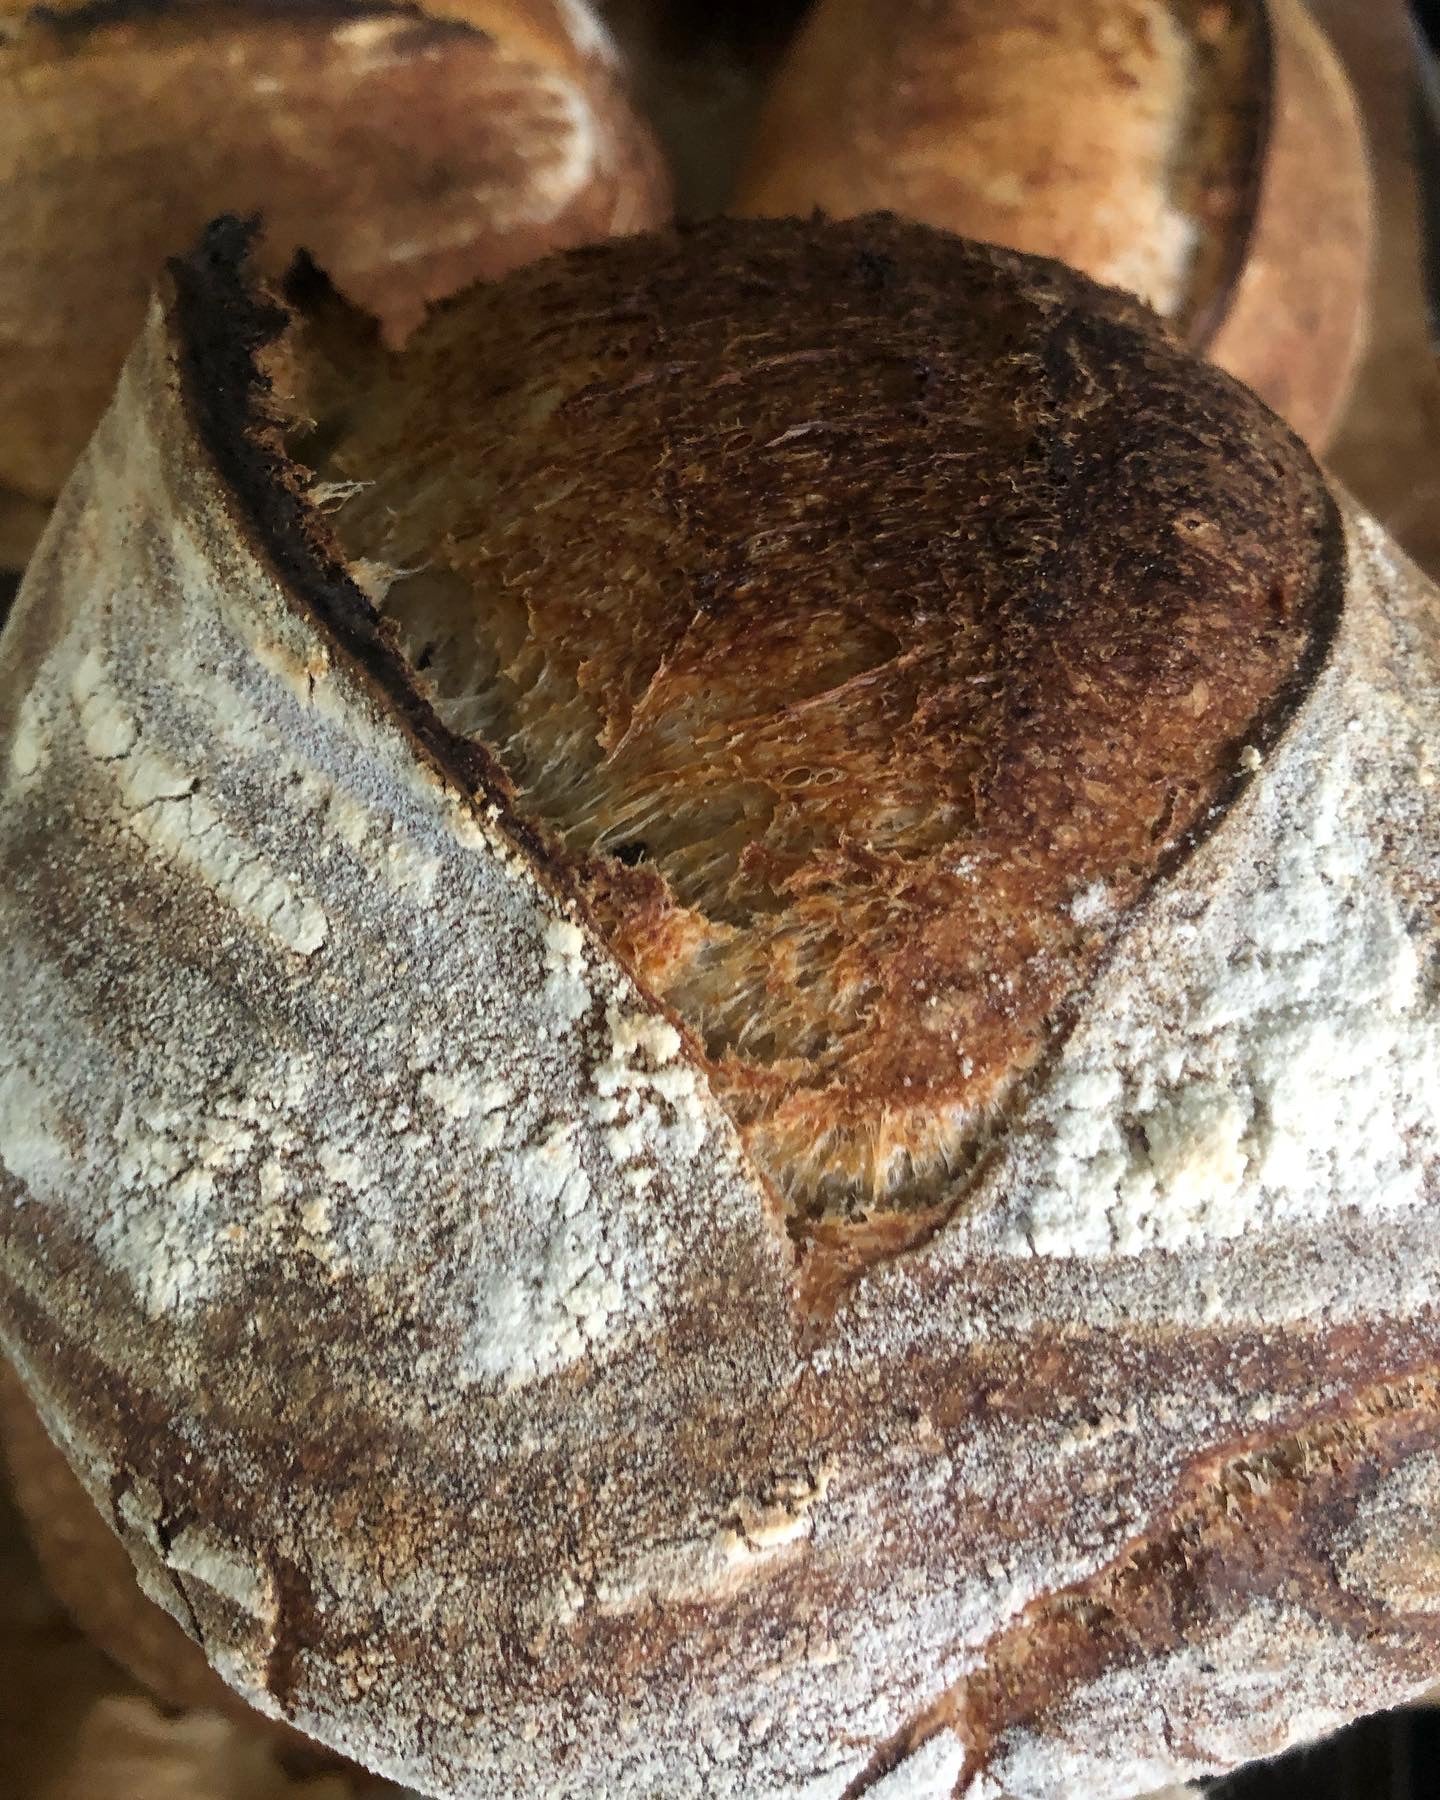 WED MAY 15th Crusty Country Sourdough Porch Pick up 4-9pm OR Purplebrown 430-6p